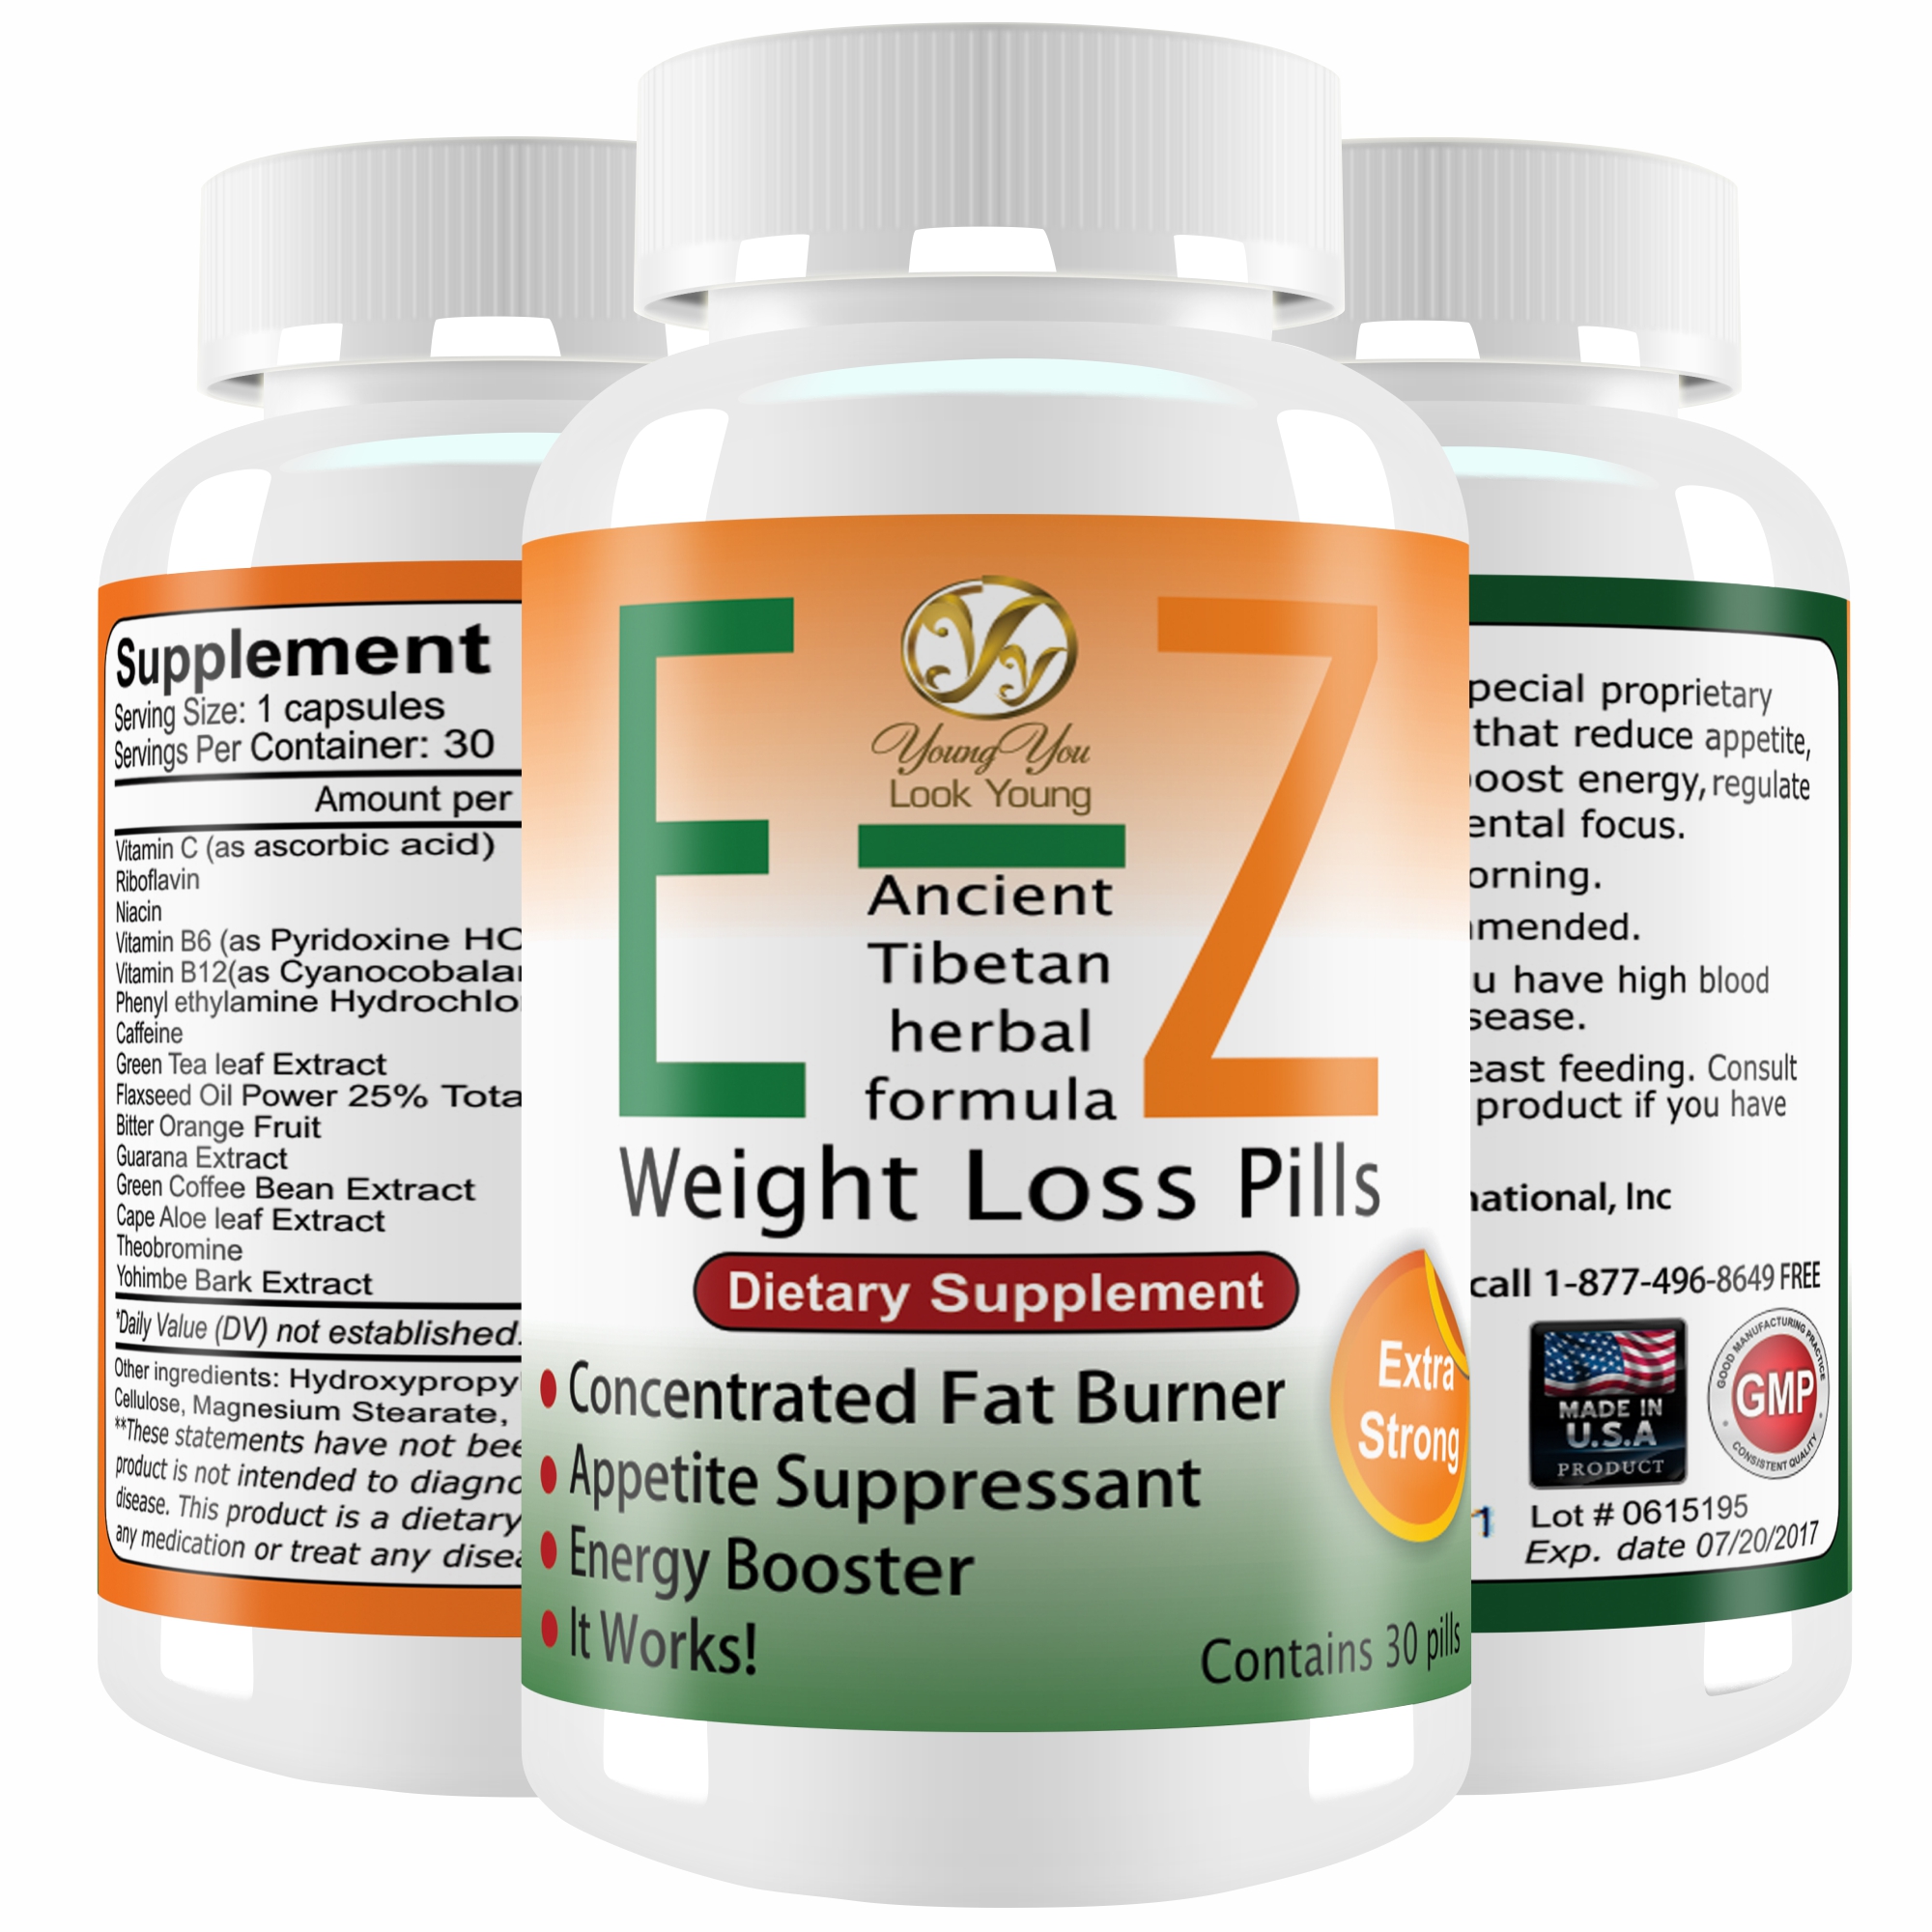 YoungYou Organix E-Z Weight Loss Pills. Double Strength Herbal Appetite Suppressant and Fat Burner